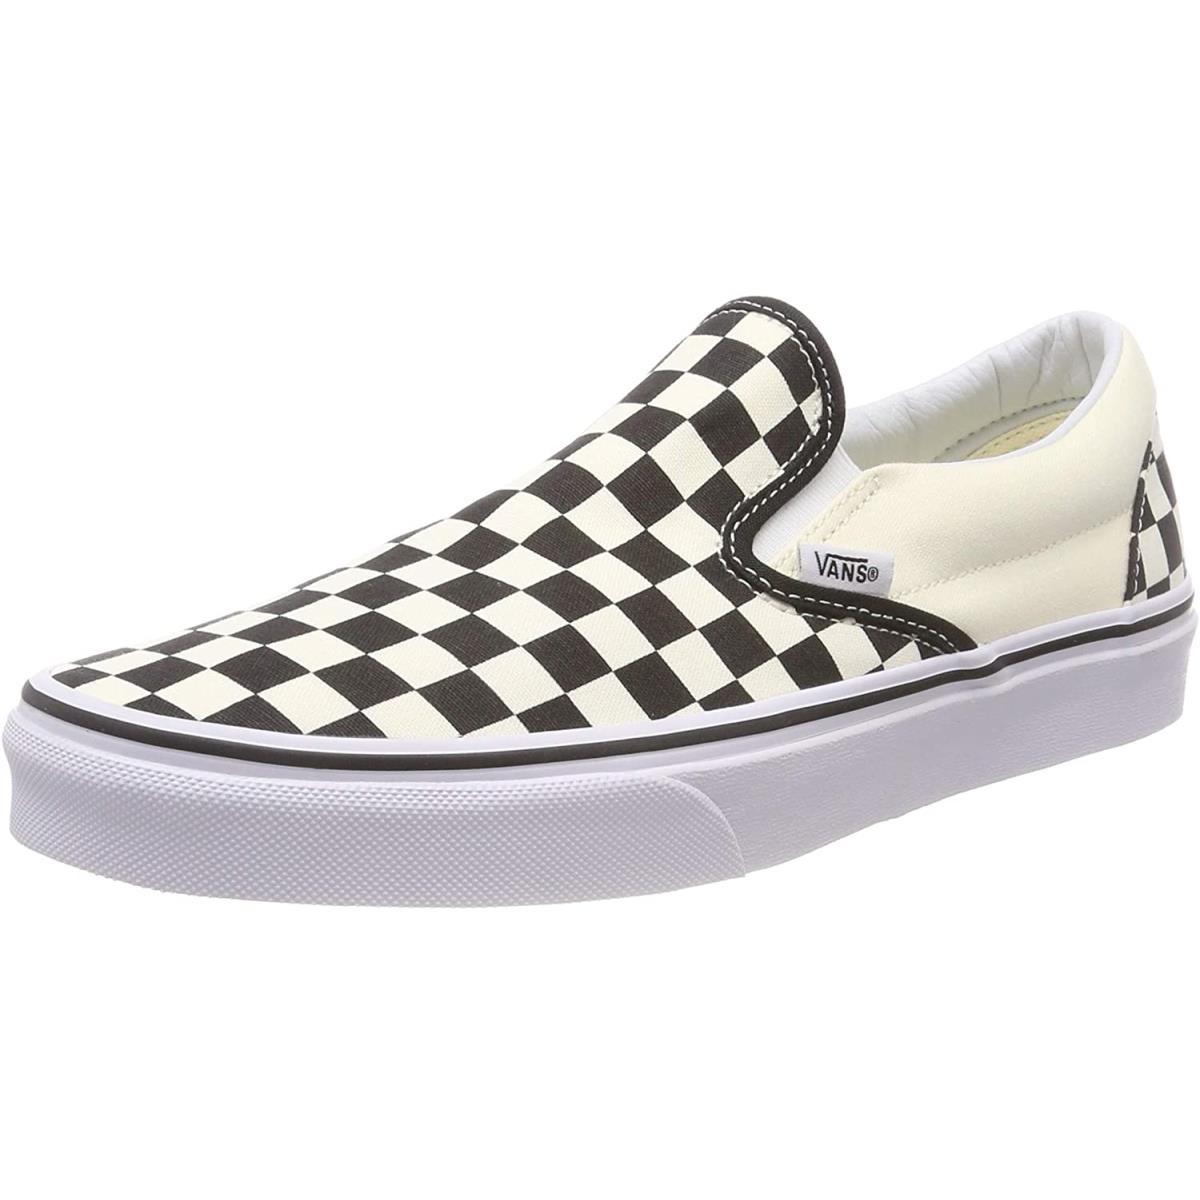 Vans shoes  - Black/Off White/Checkerboard 12